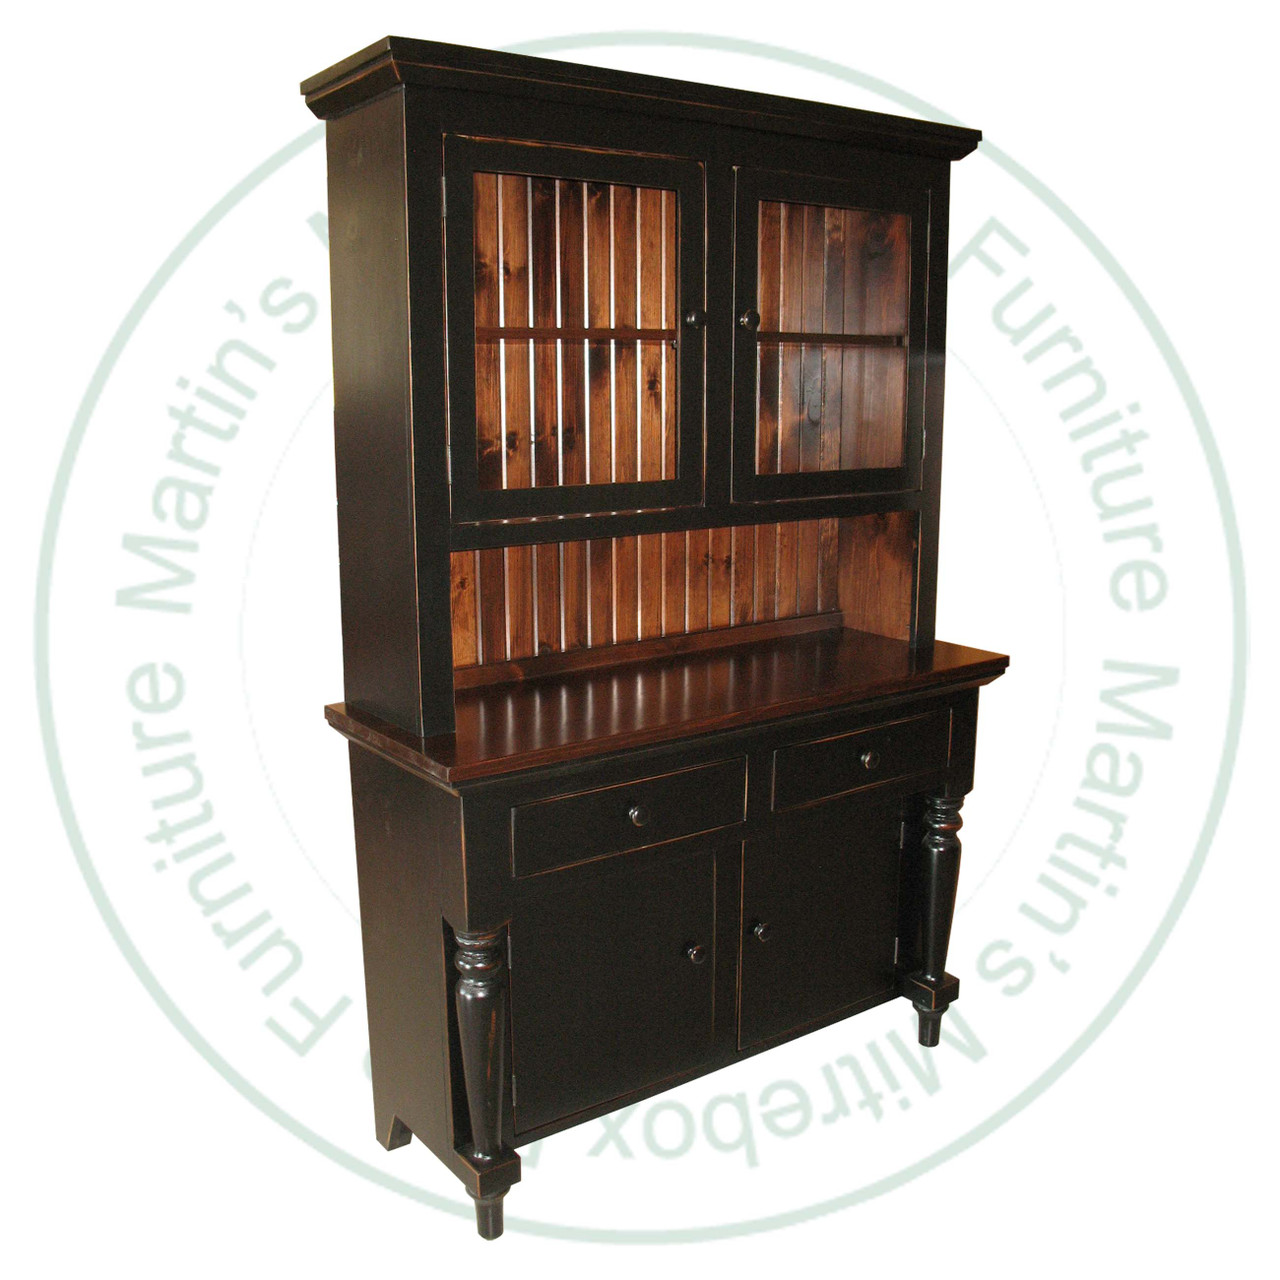 Maple Bevel Top Hutch And Buffet 19''D x 52''W x 79''H